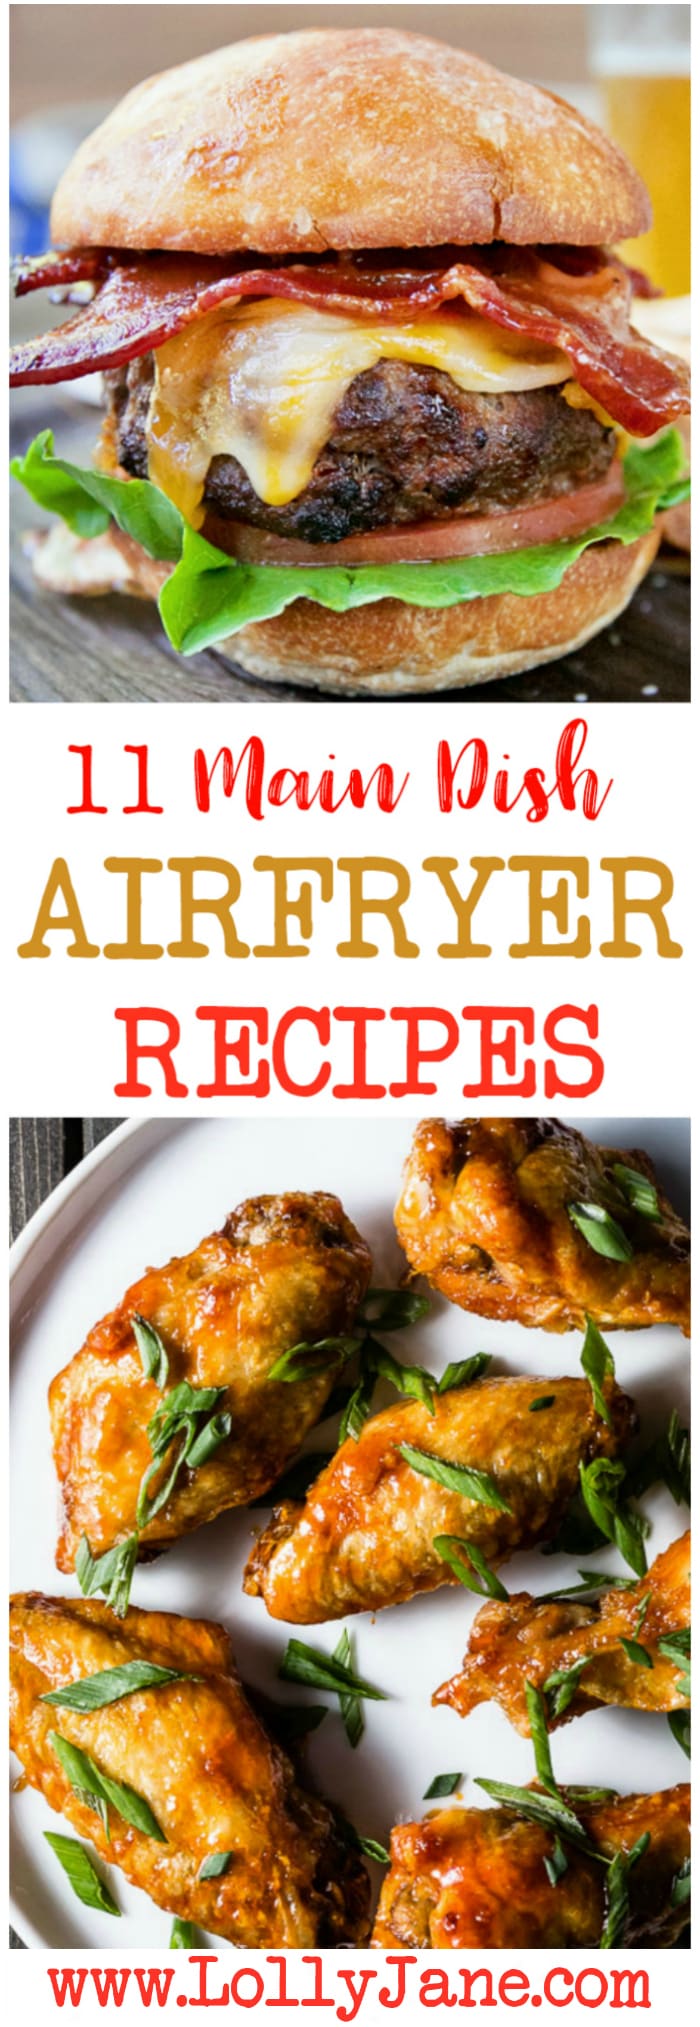 11 Airfryer Main Dish Recipes to try this week!